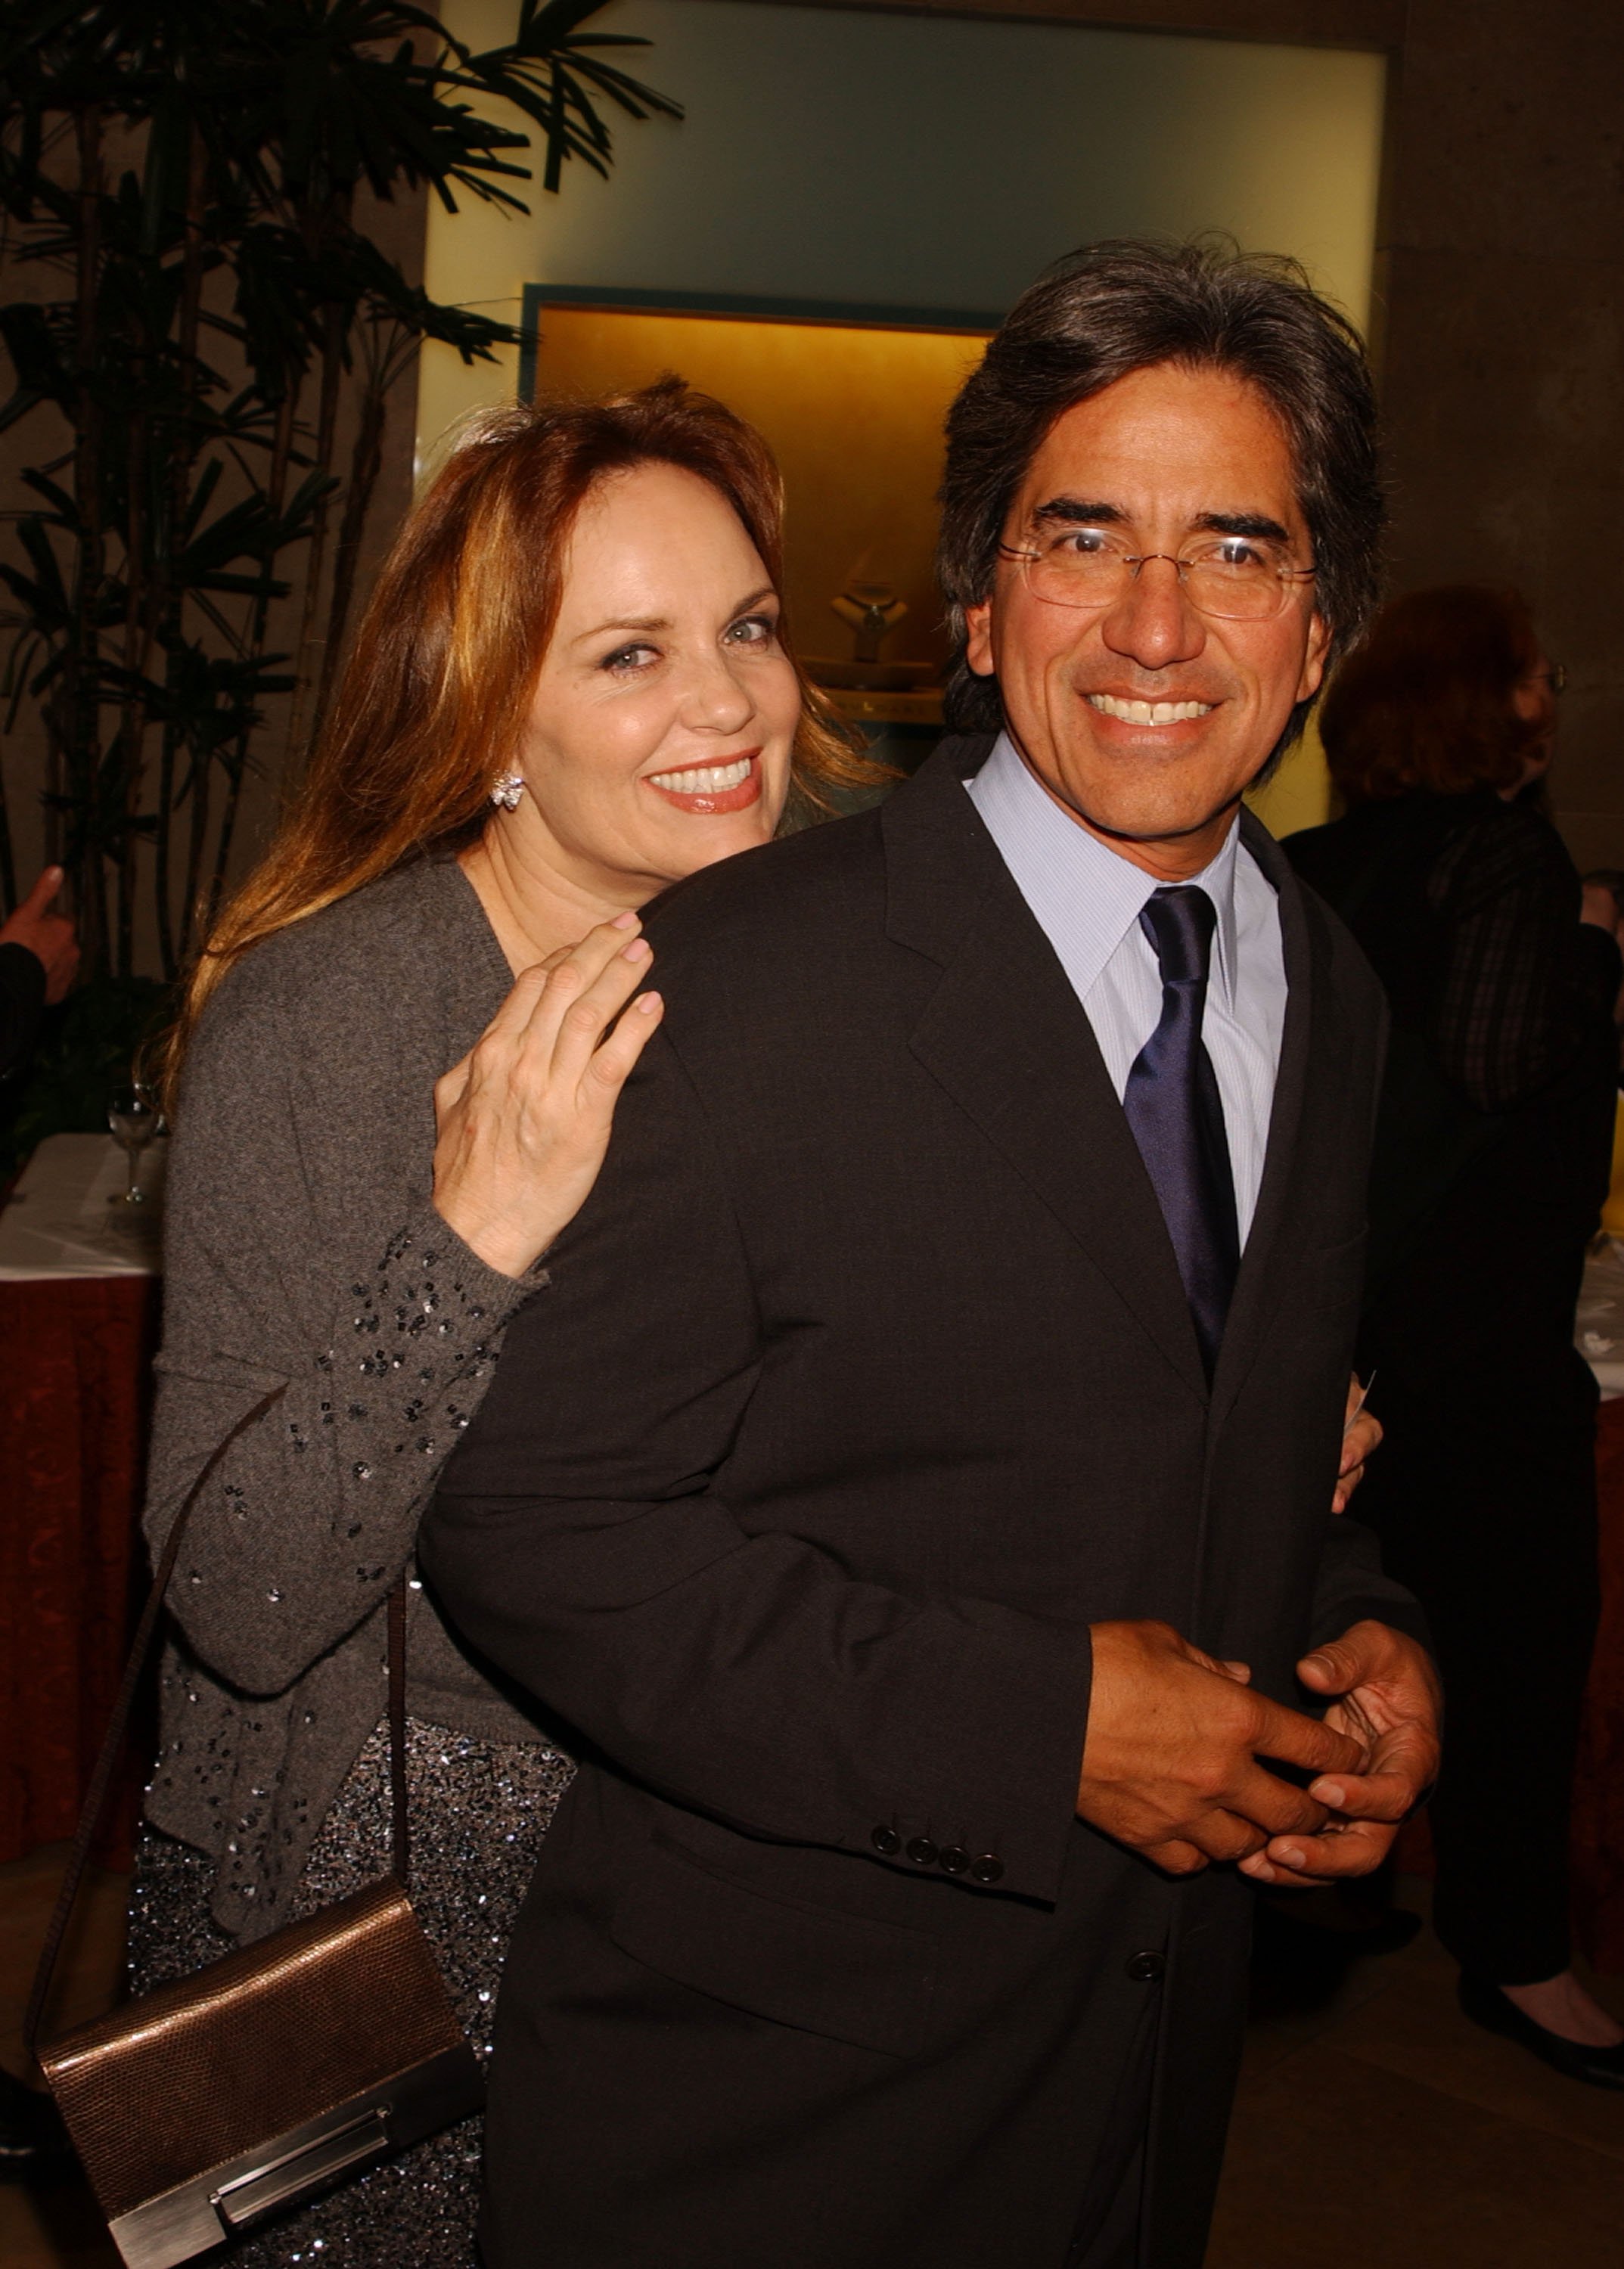 Catherine Bach and Peter Lopez at an event where Warren Cowan was named Mentor of the Year by Volunteers of America on March 21, 2002 | Source: Getty Images